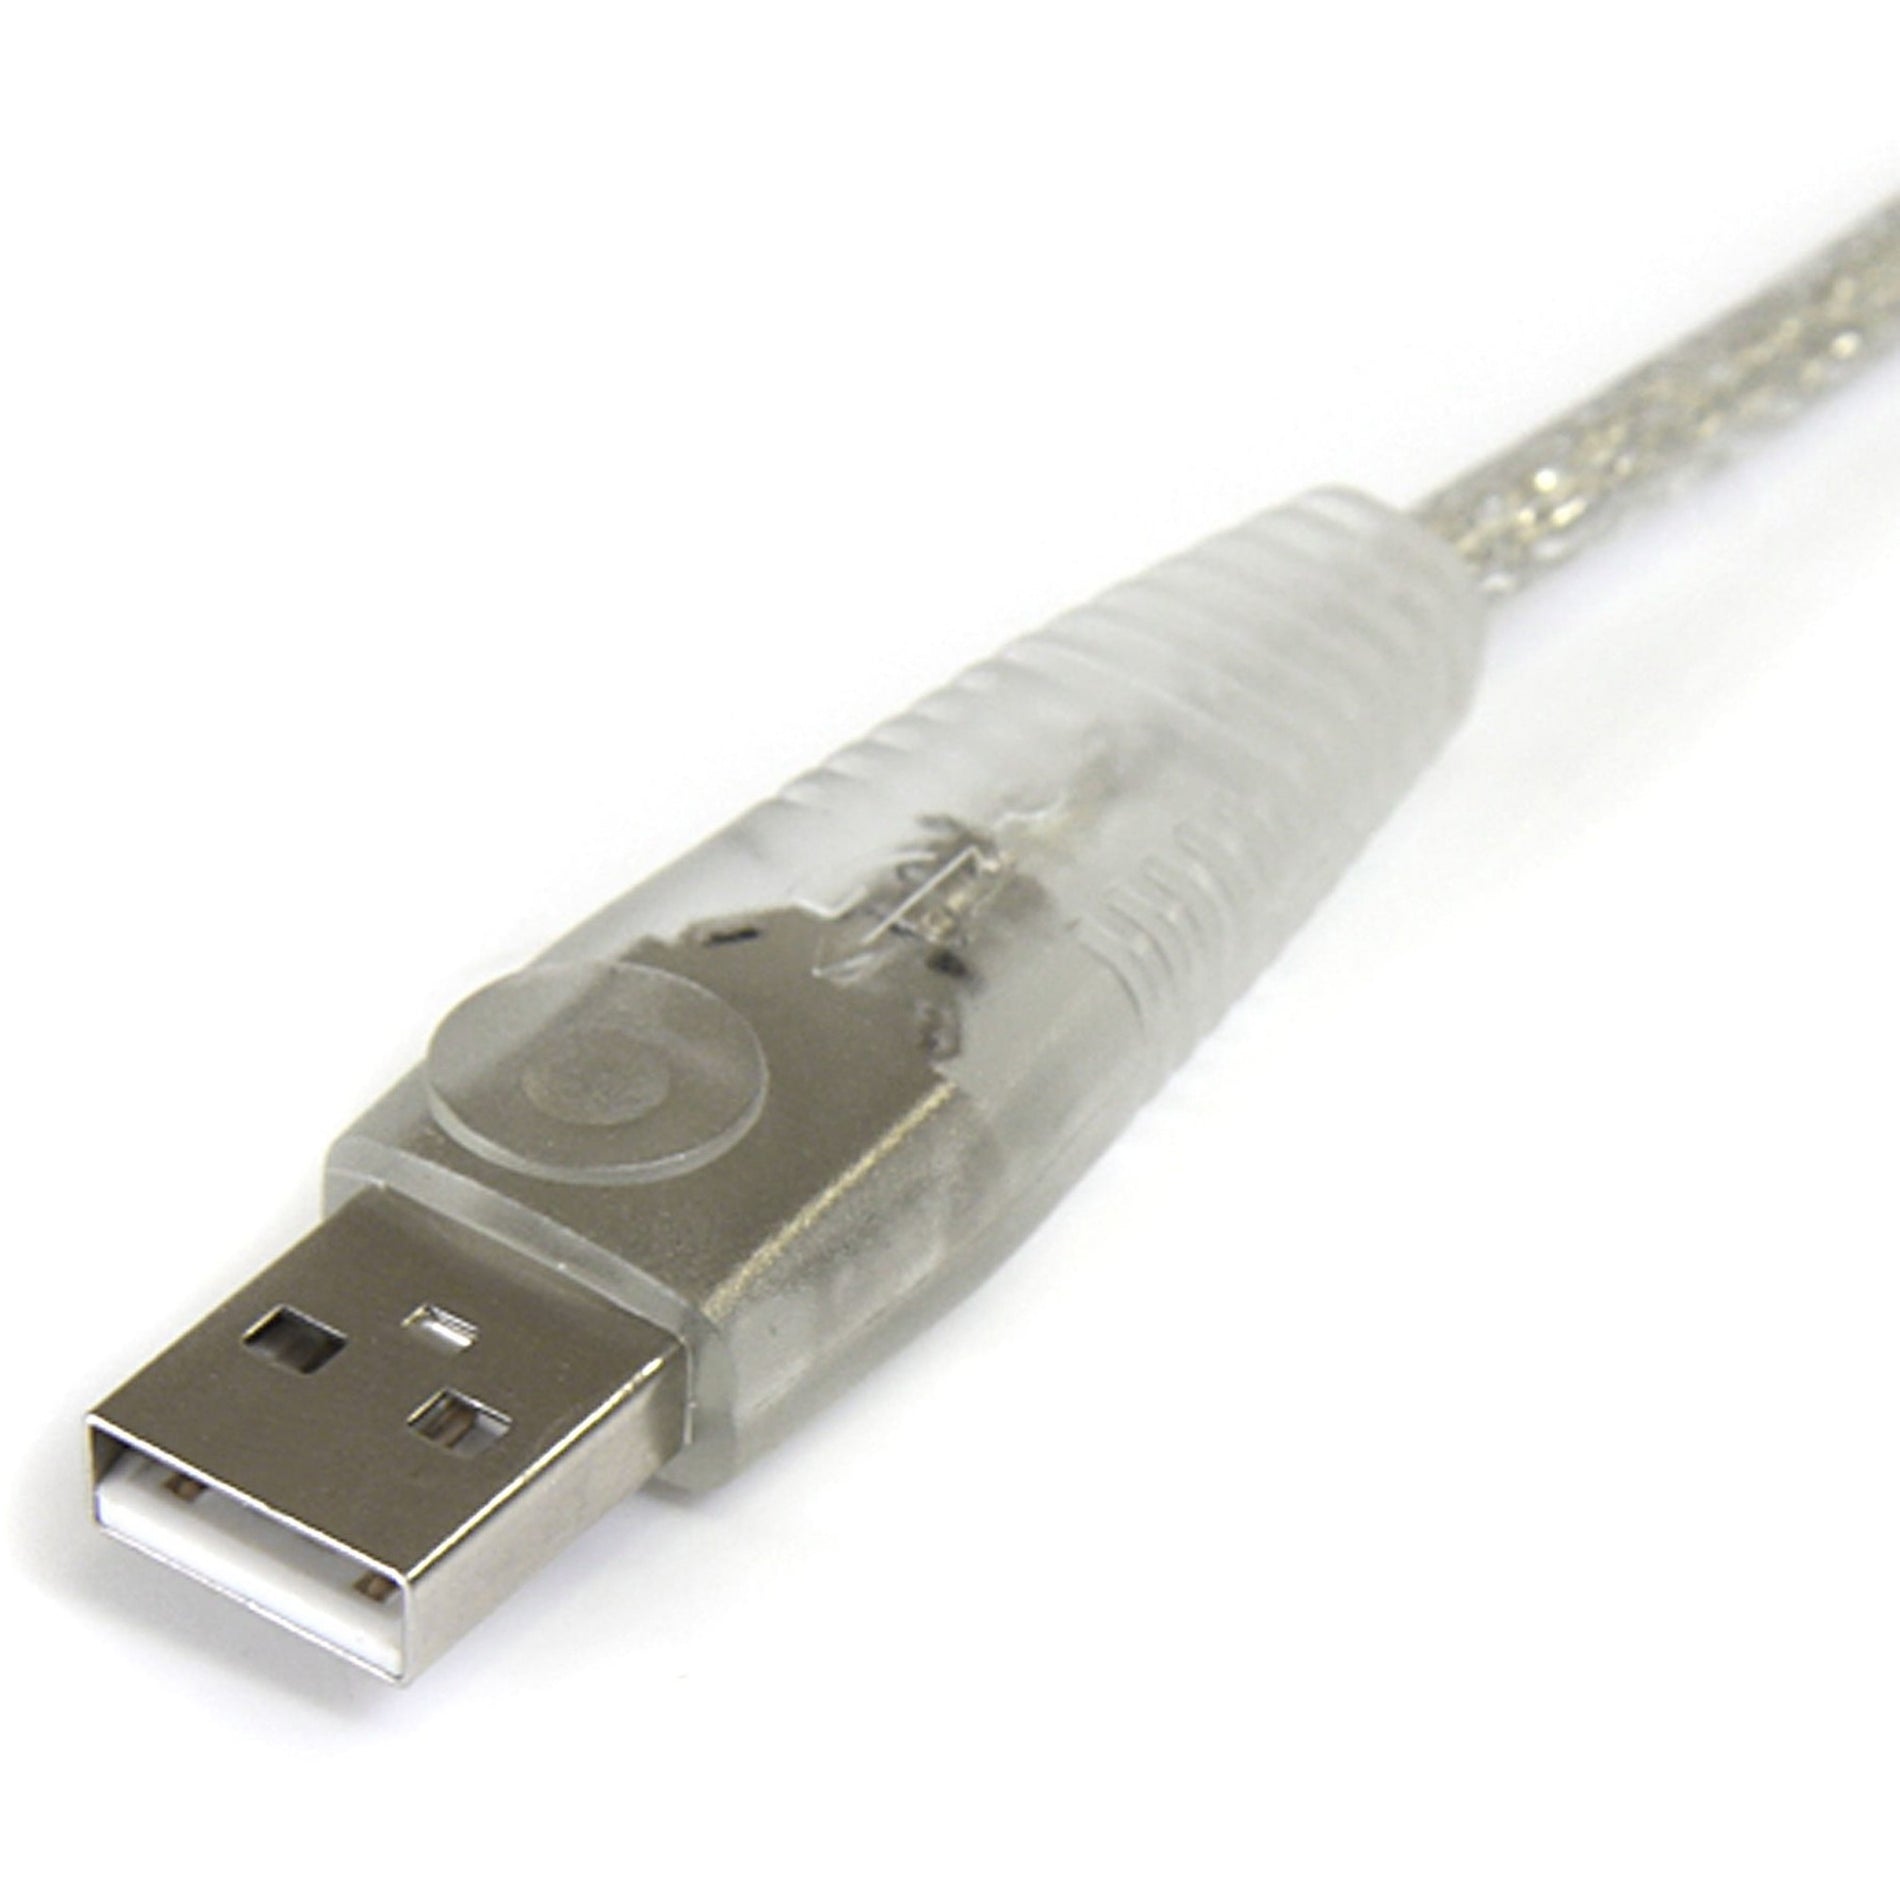 StarTech.com USB2HAB15T 15 ft Transparent USB 2.0 Cable - A to B, High-Speed Data Transfer for Printers, Hard Drives, Scanners, and More